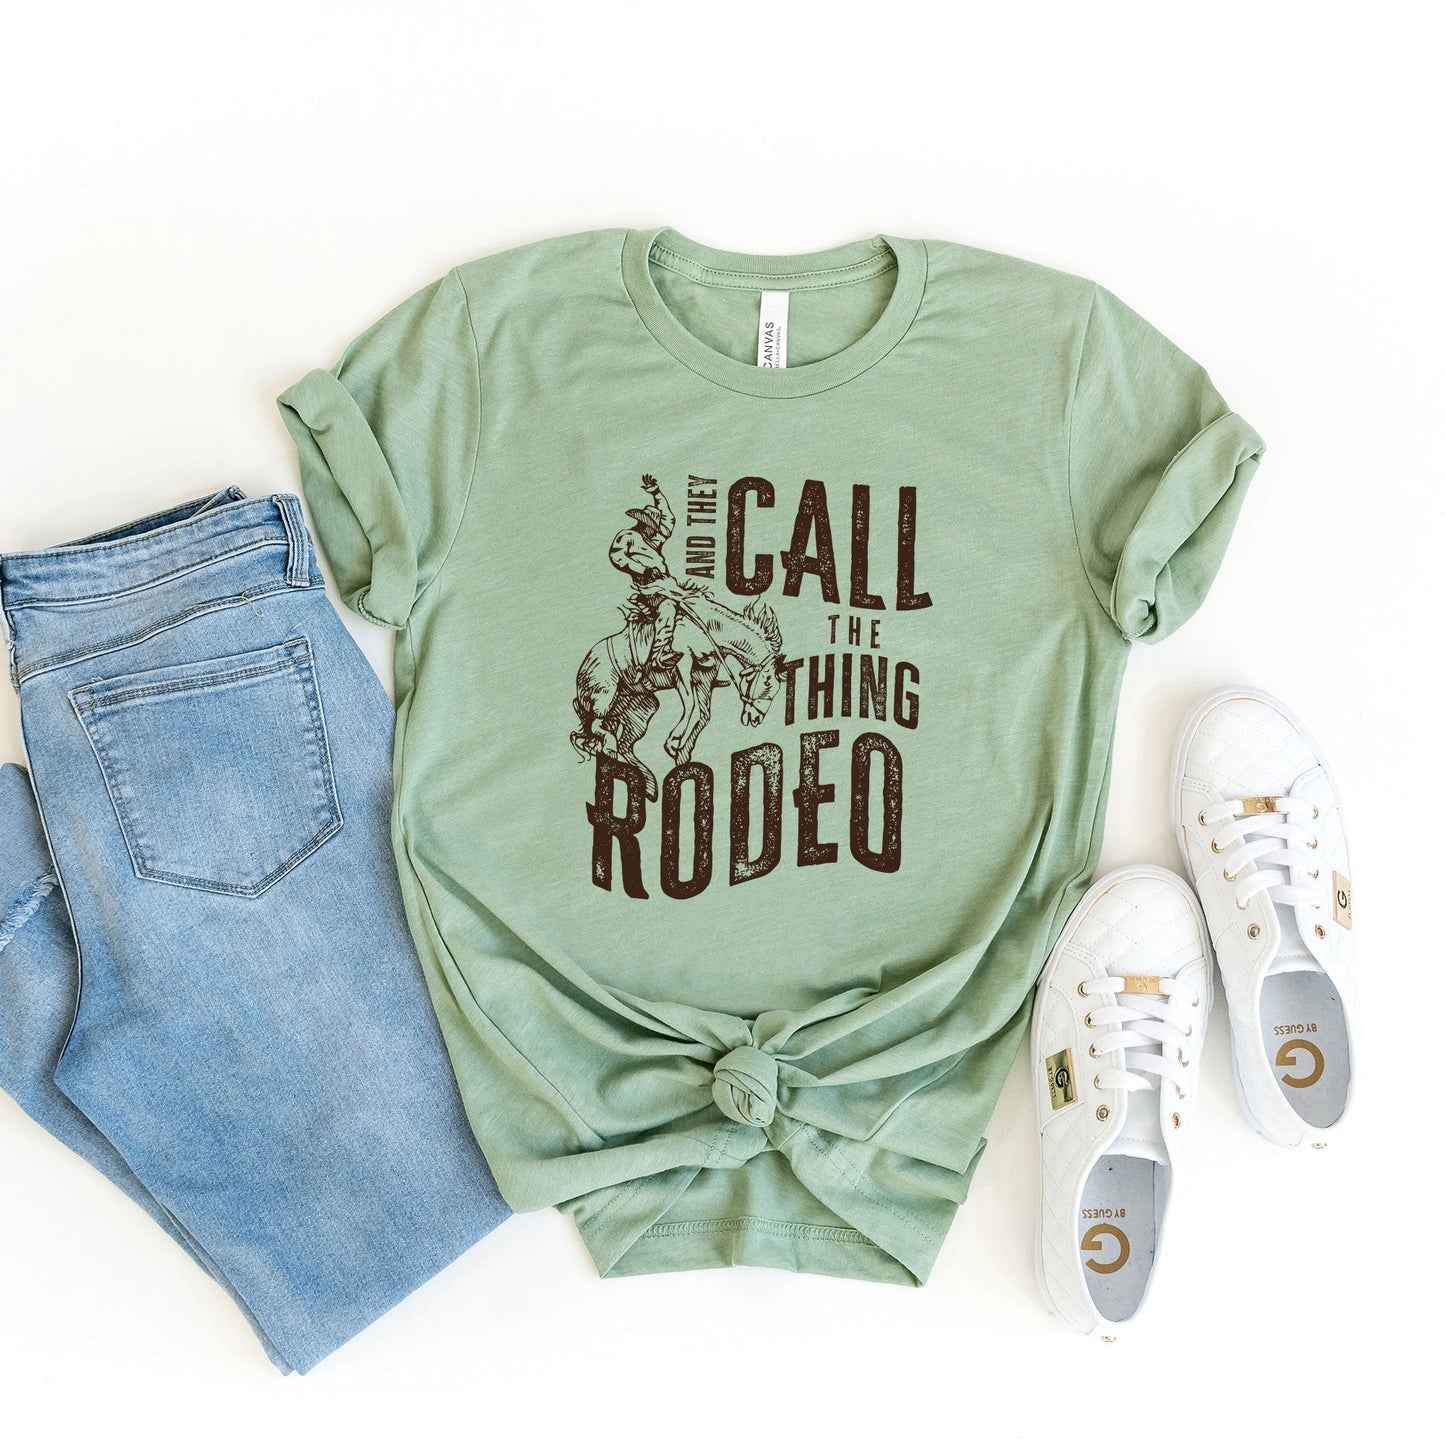 They Call The Thing Rodeo | Short Sleeve Crew Neck